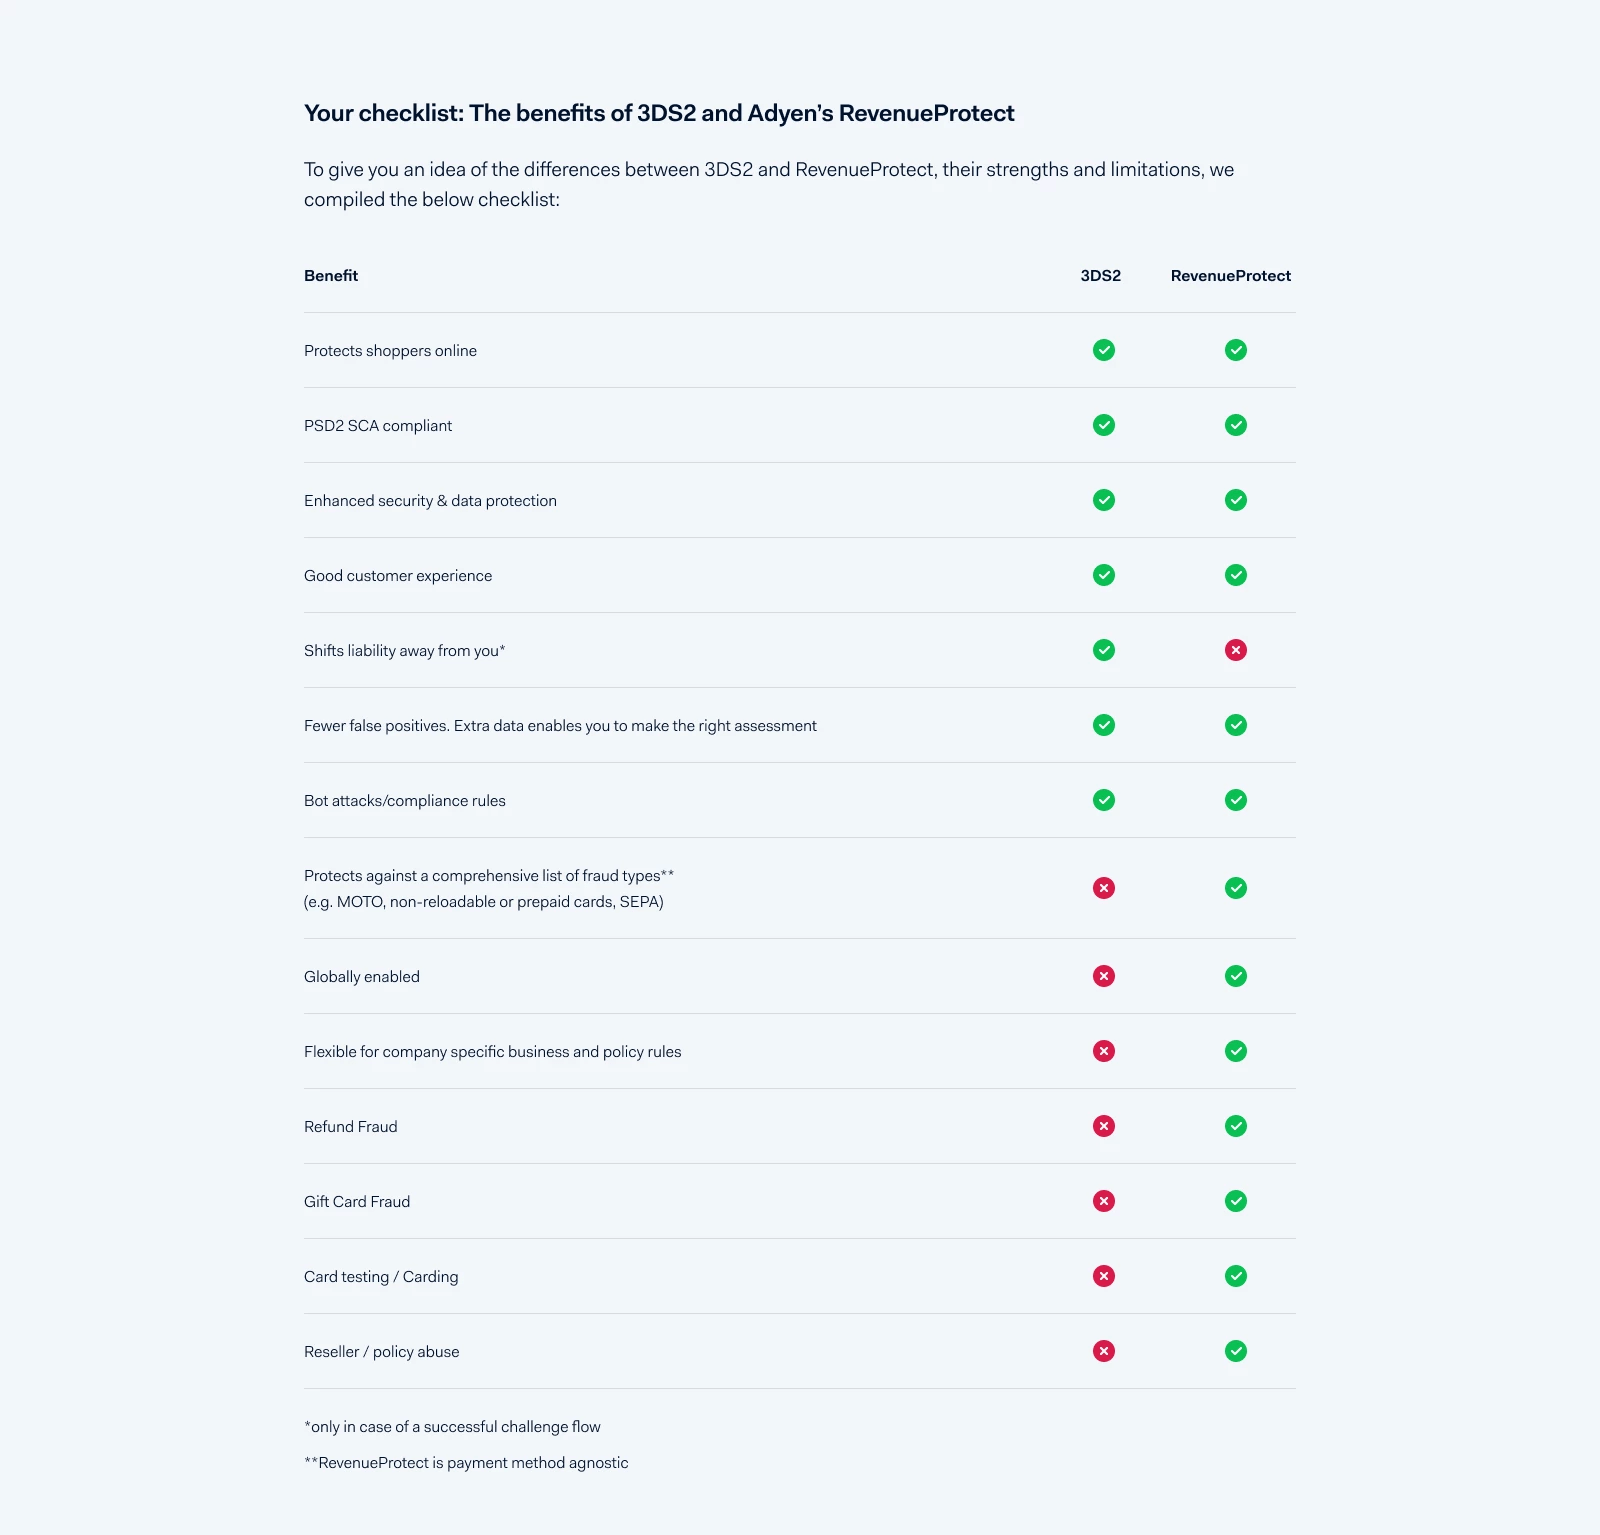 A checklist highlighting the benefits of 3DS2 and Adyen’s RevenueProtect